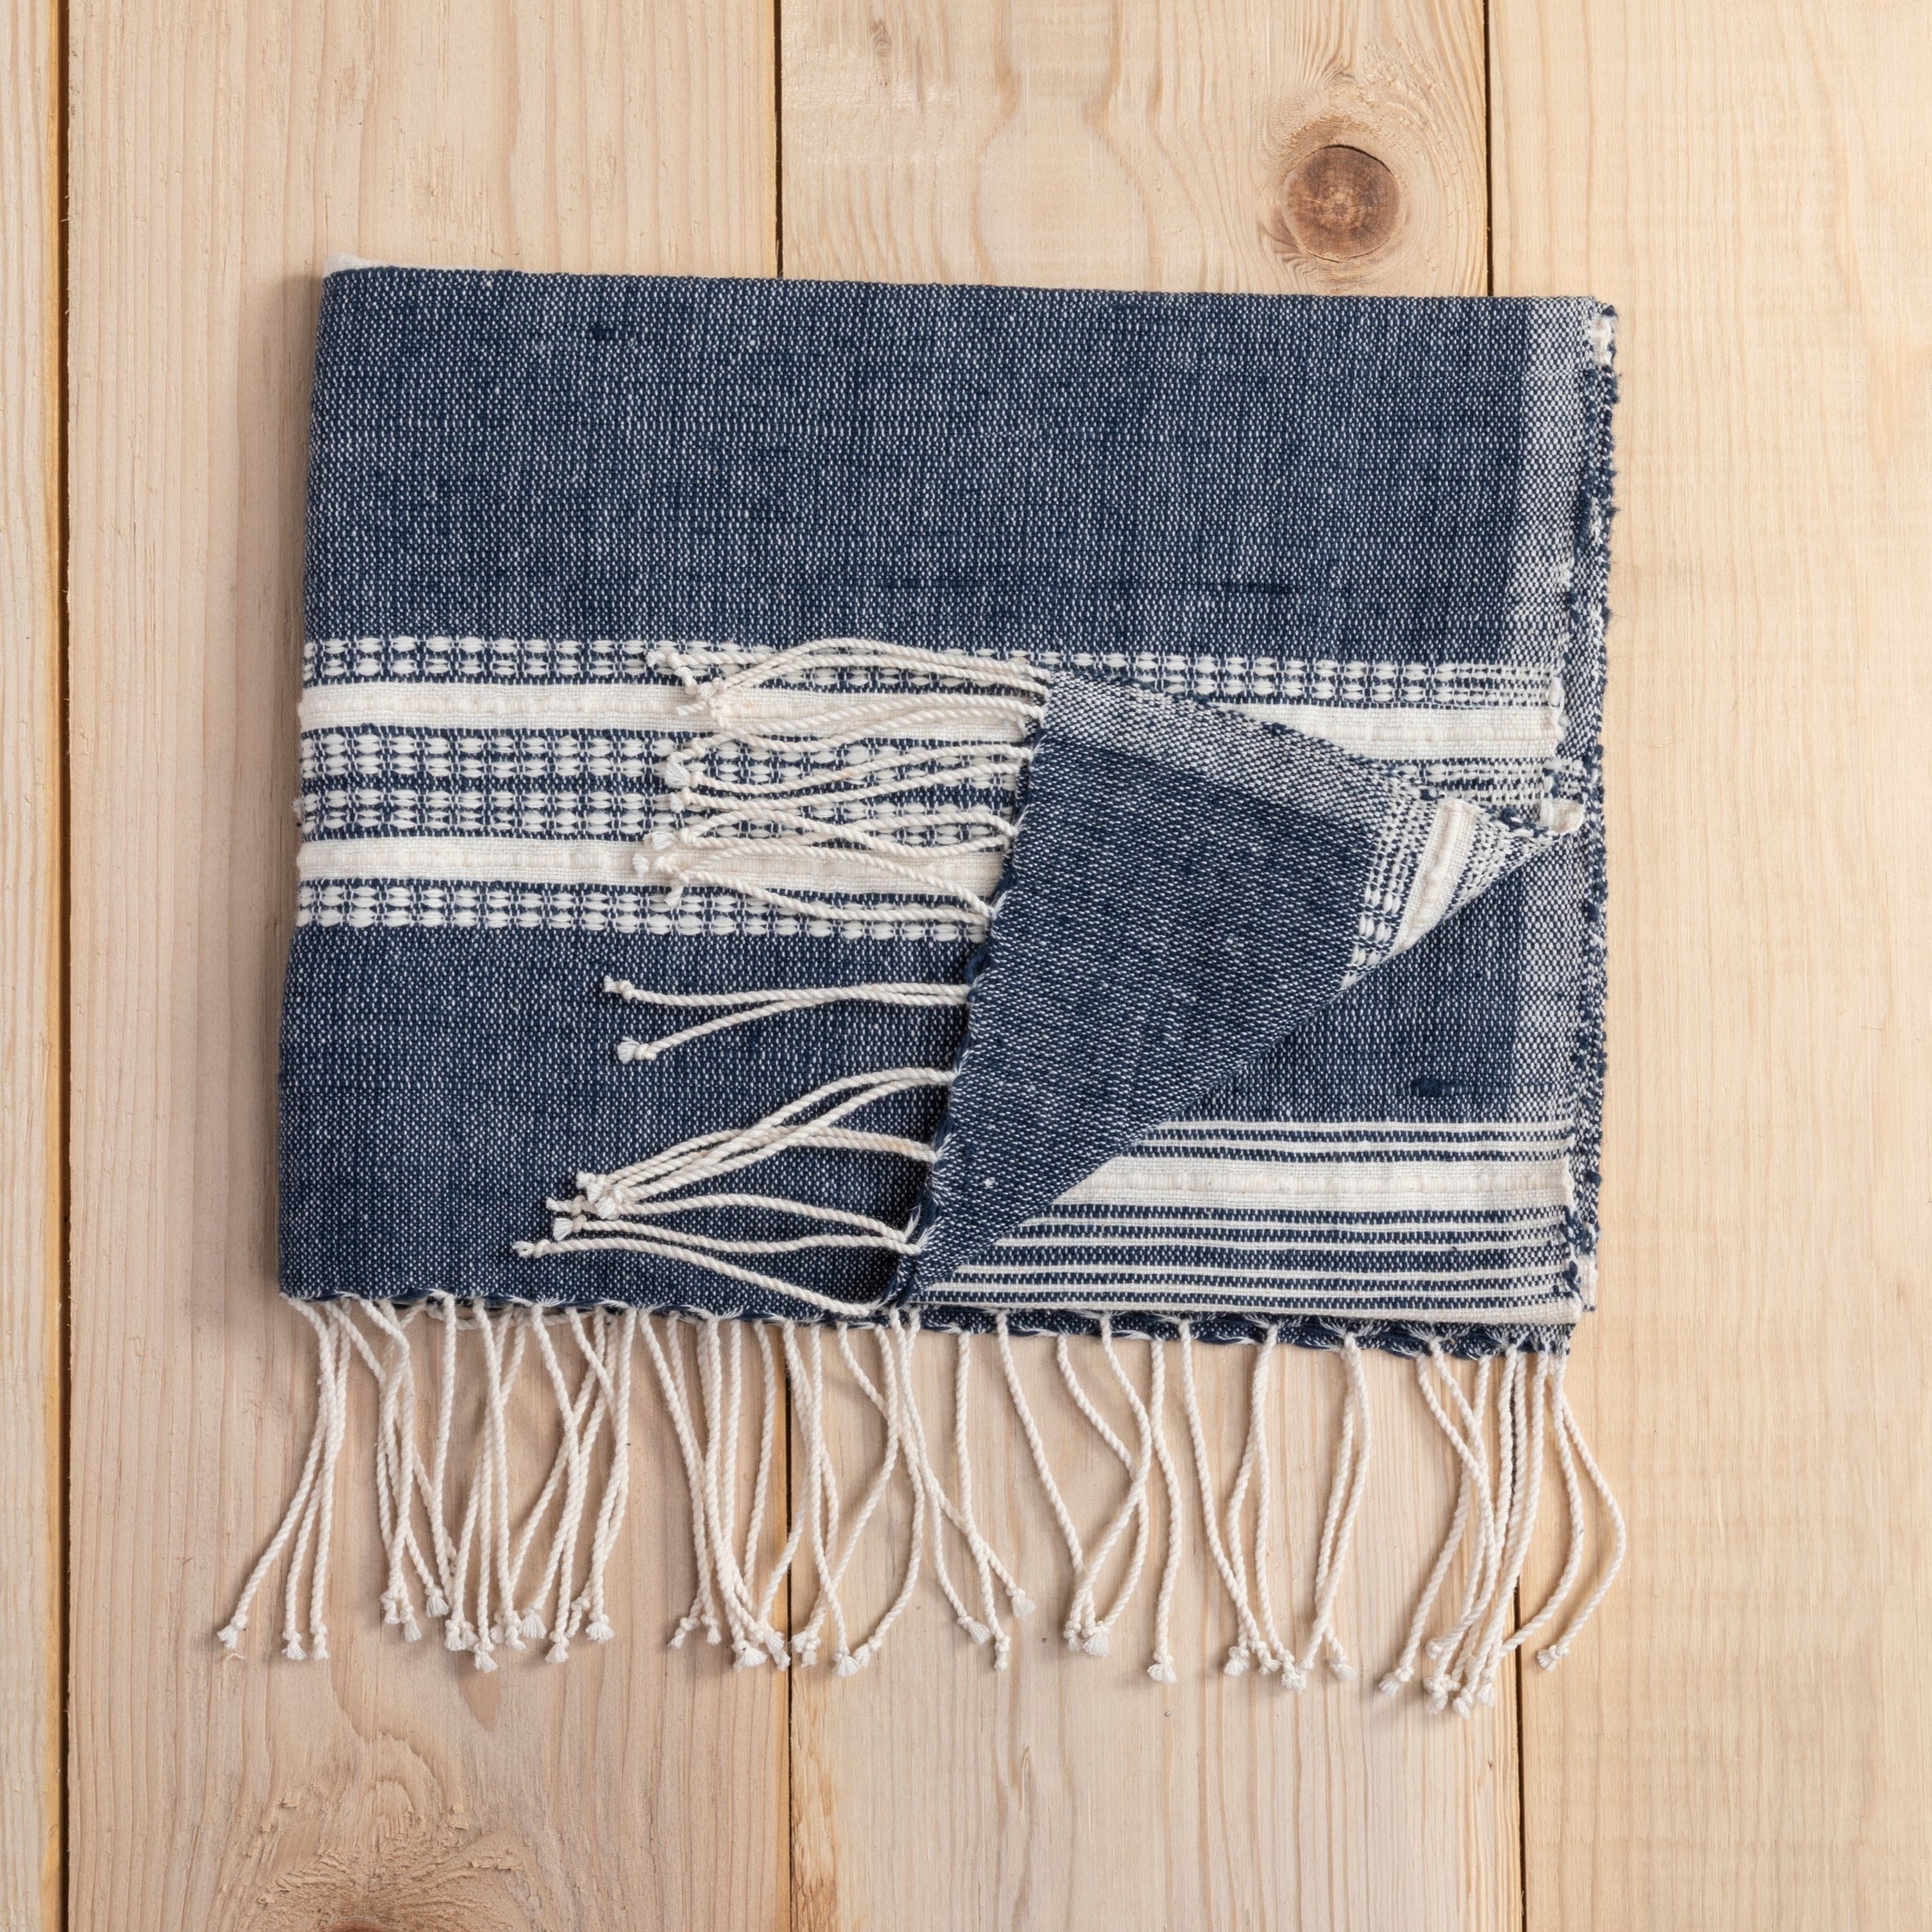 Aden Cotton Hand Towel, Navy with Natural